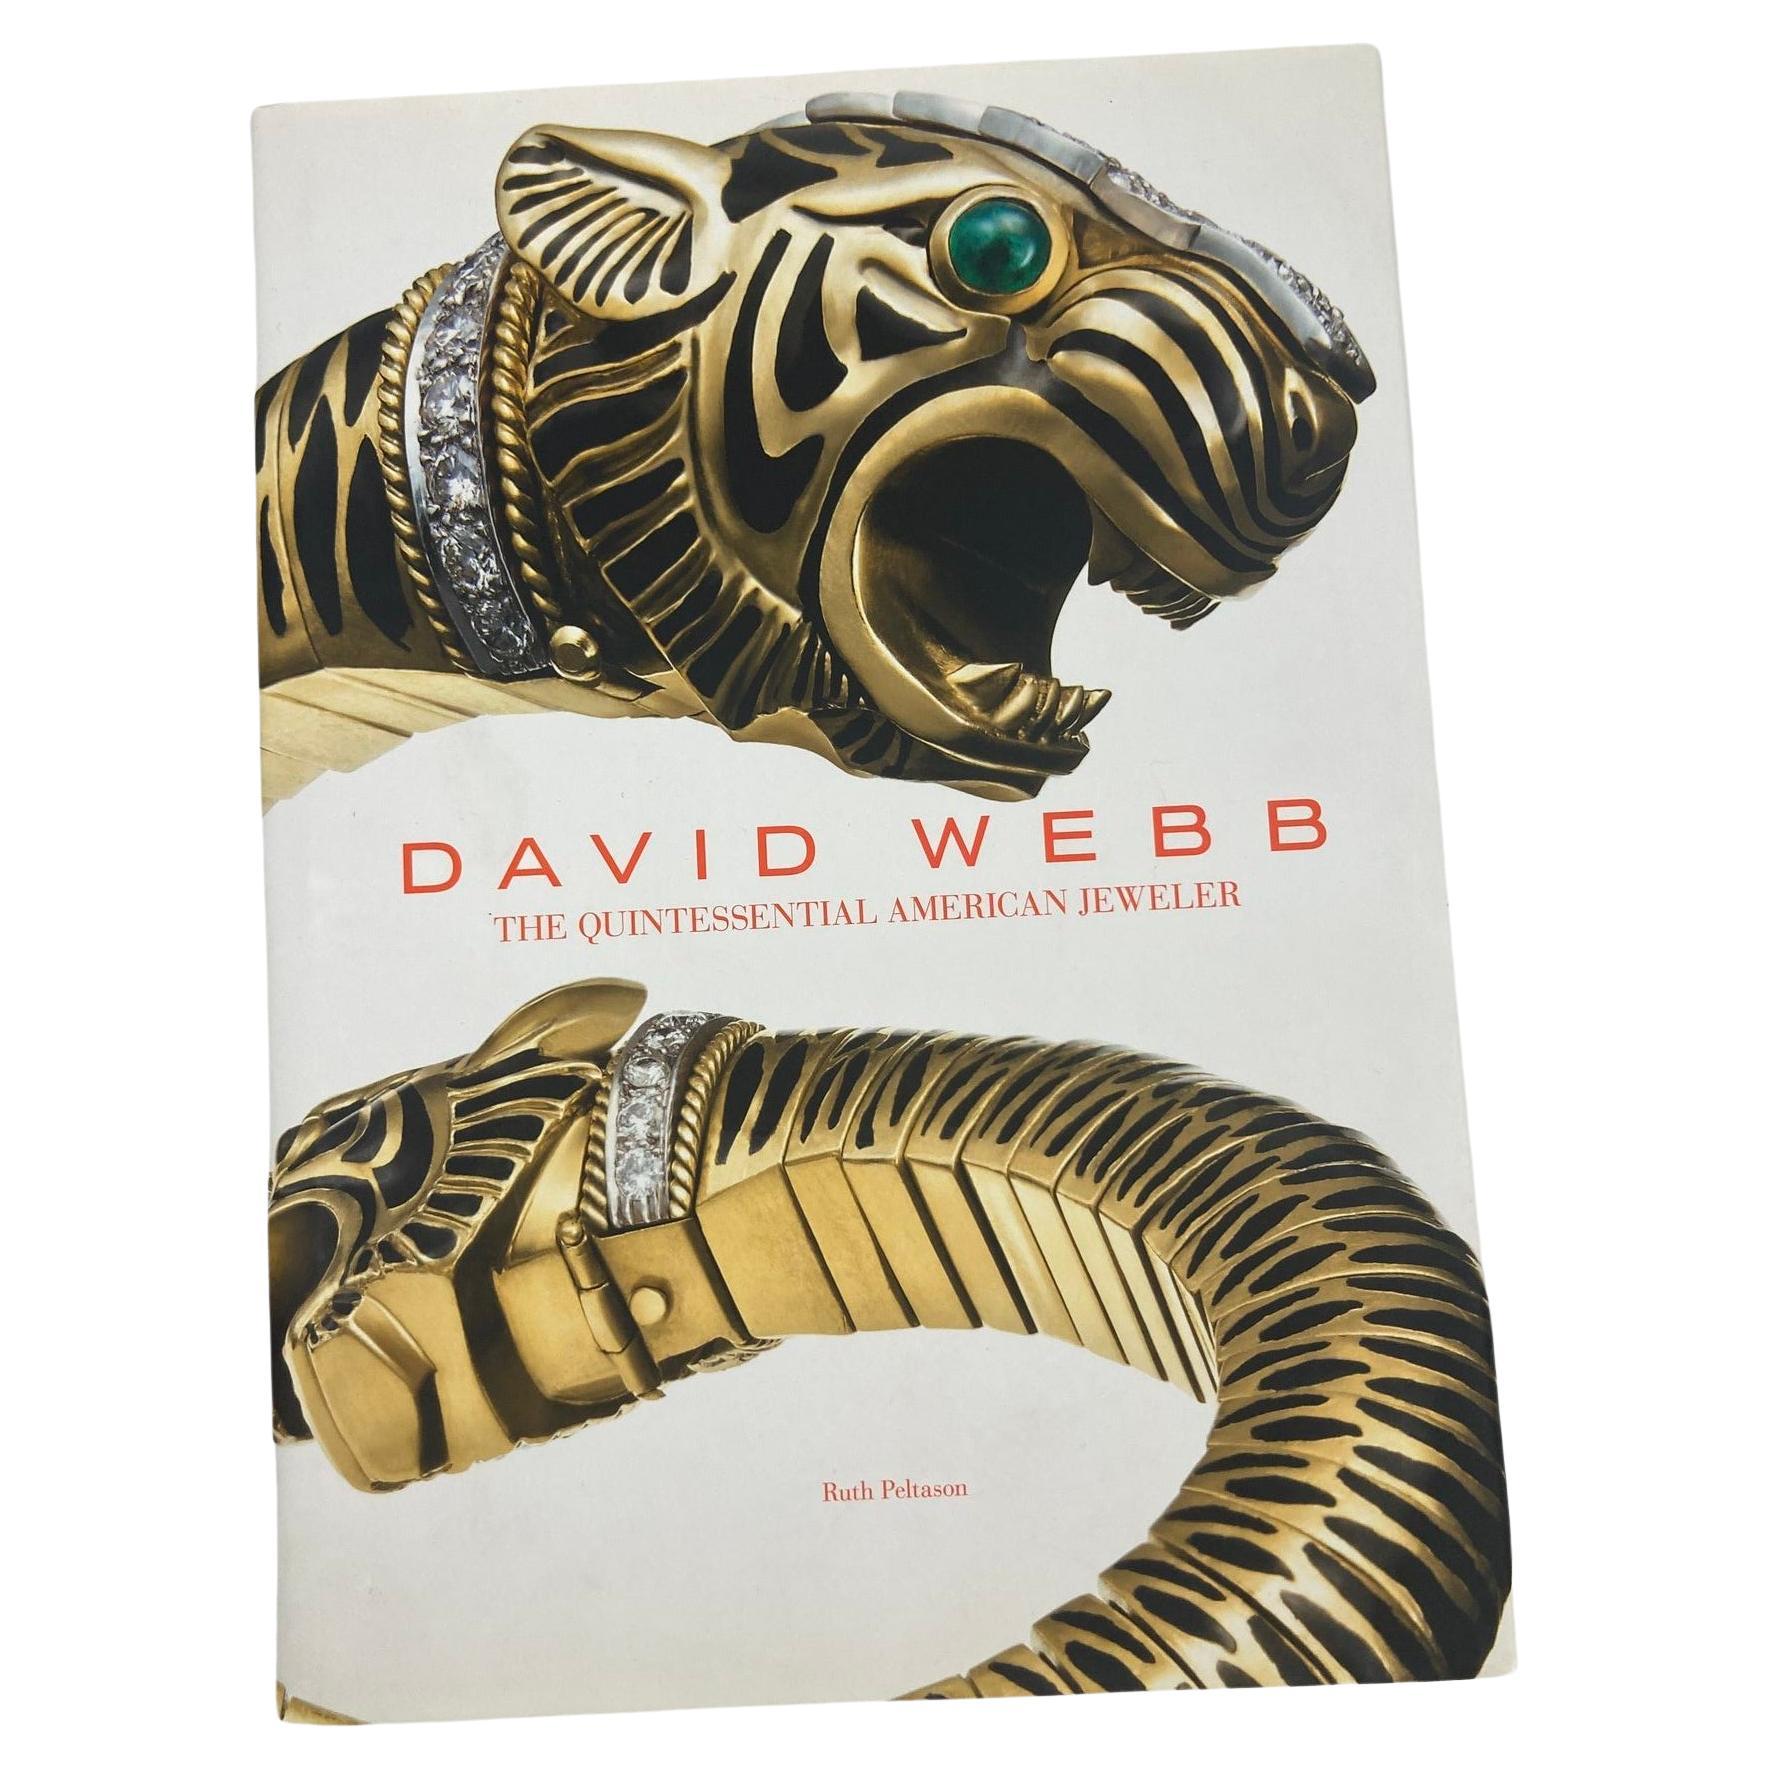 David Webb The Quintessential American Jeweler Hardcover Book by Ruth Peltason For Sale